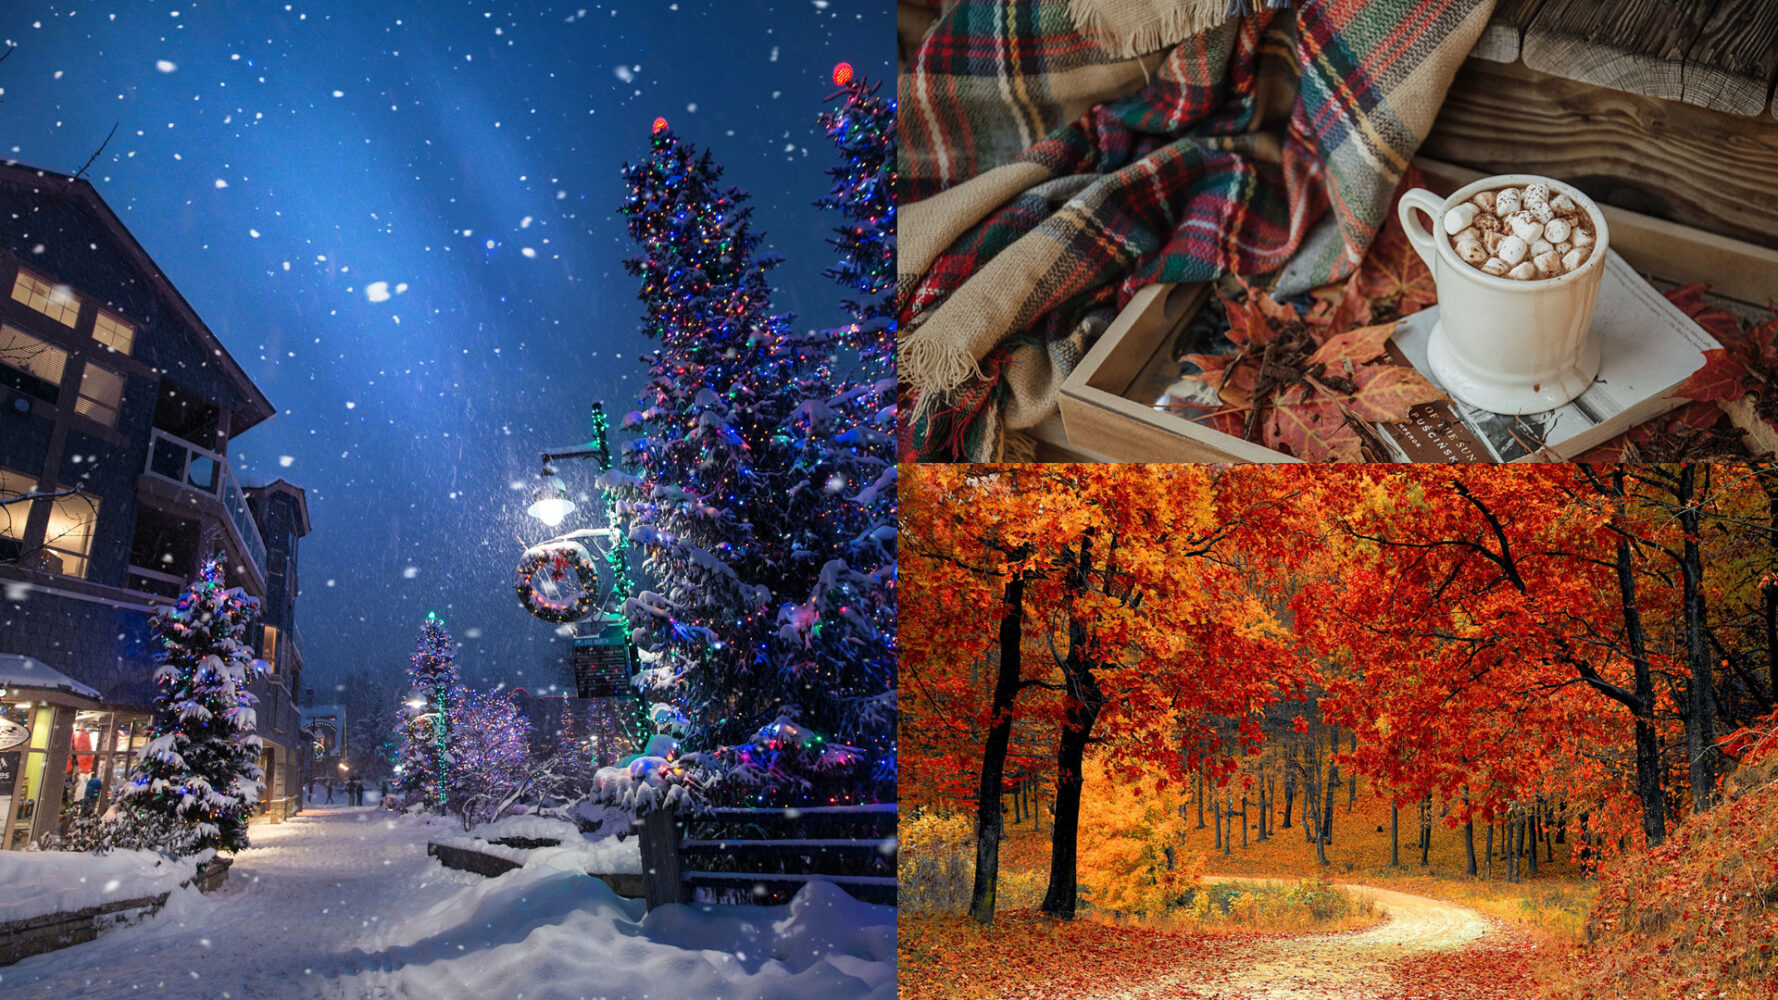 winter colors - night winter scene christmas hot cocoa plaid blanket and road in autumn with orange leaves